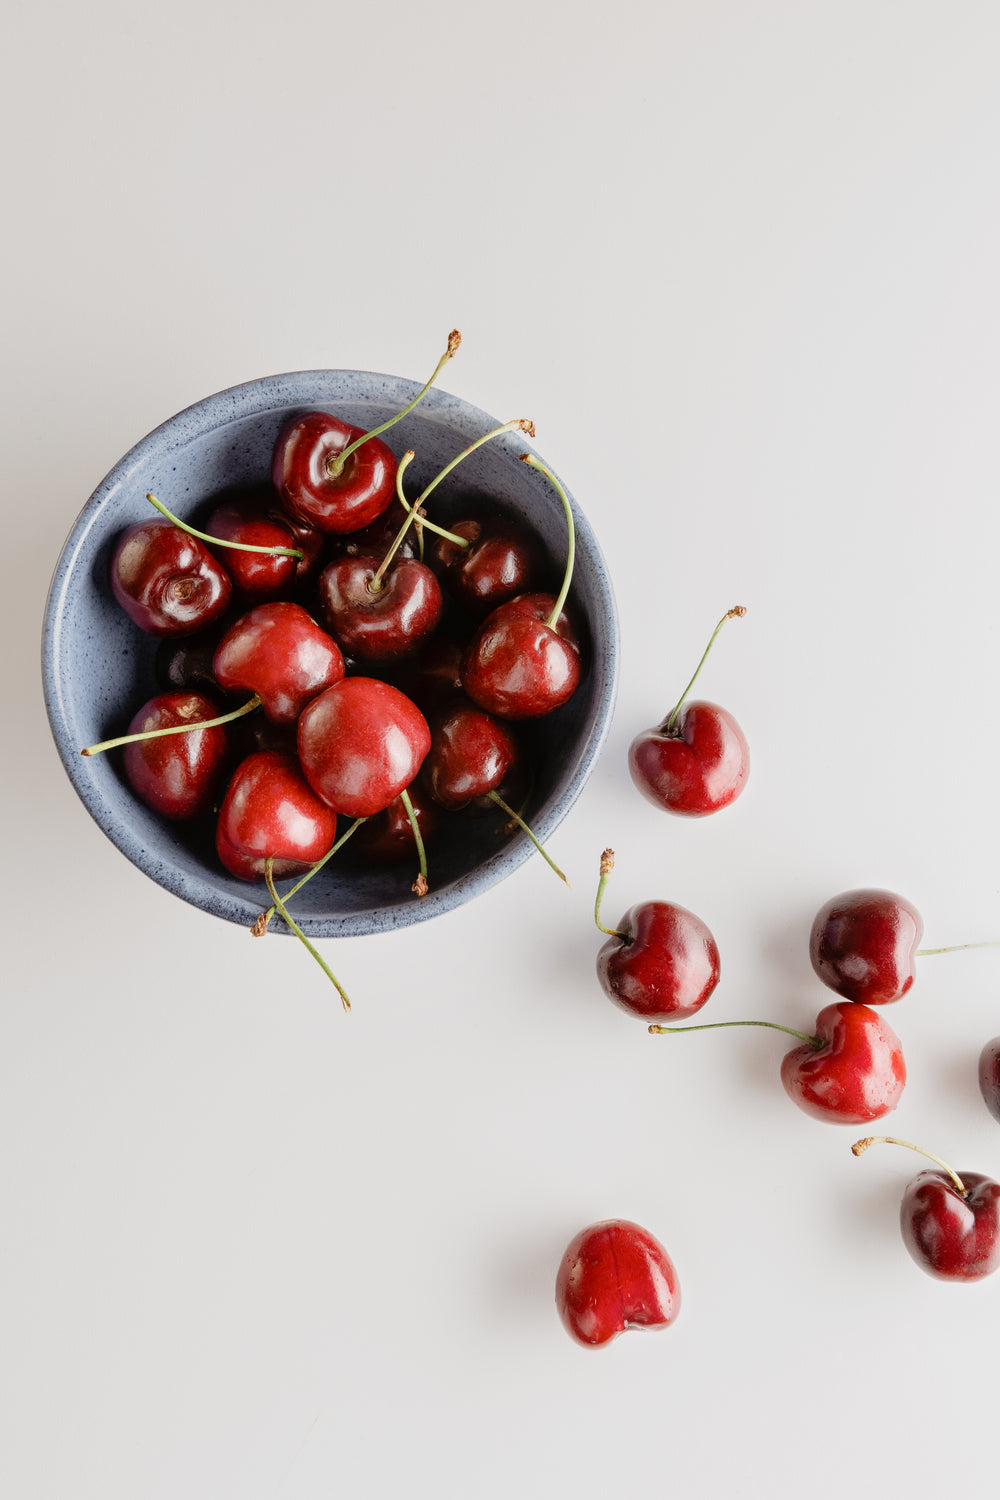 bowl of red cherries on a white background